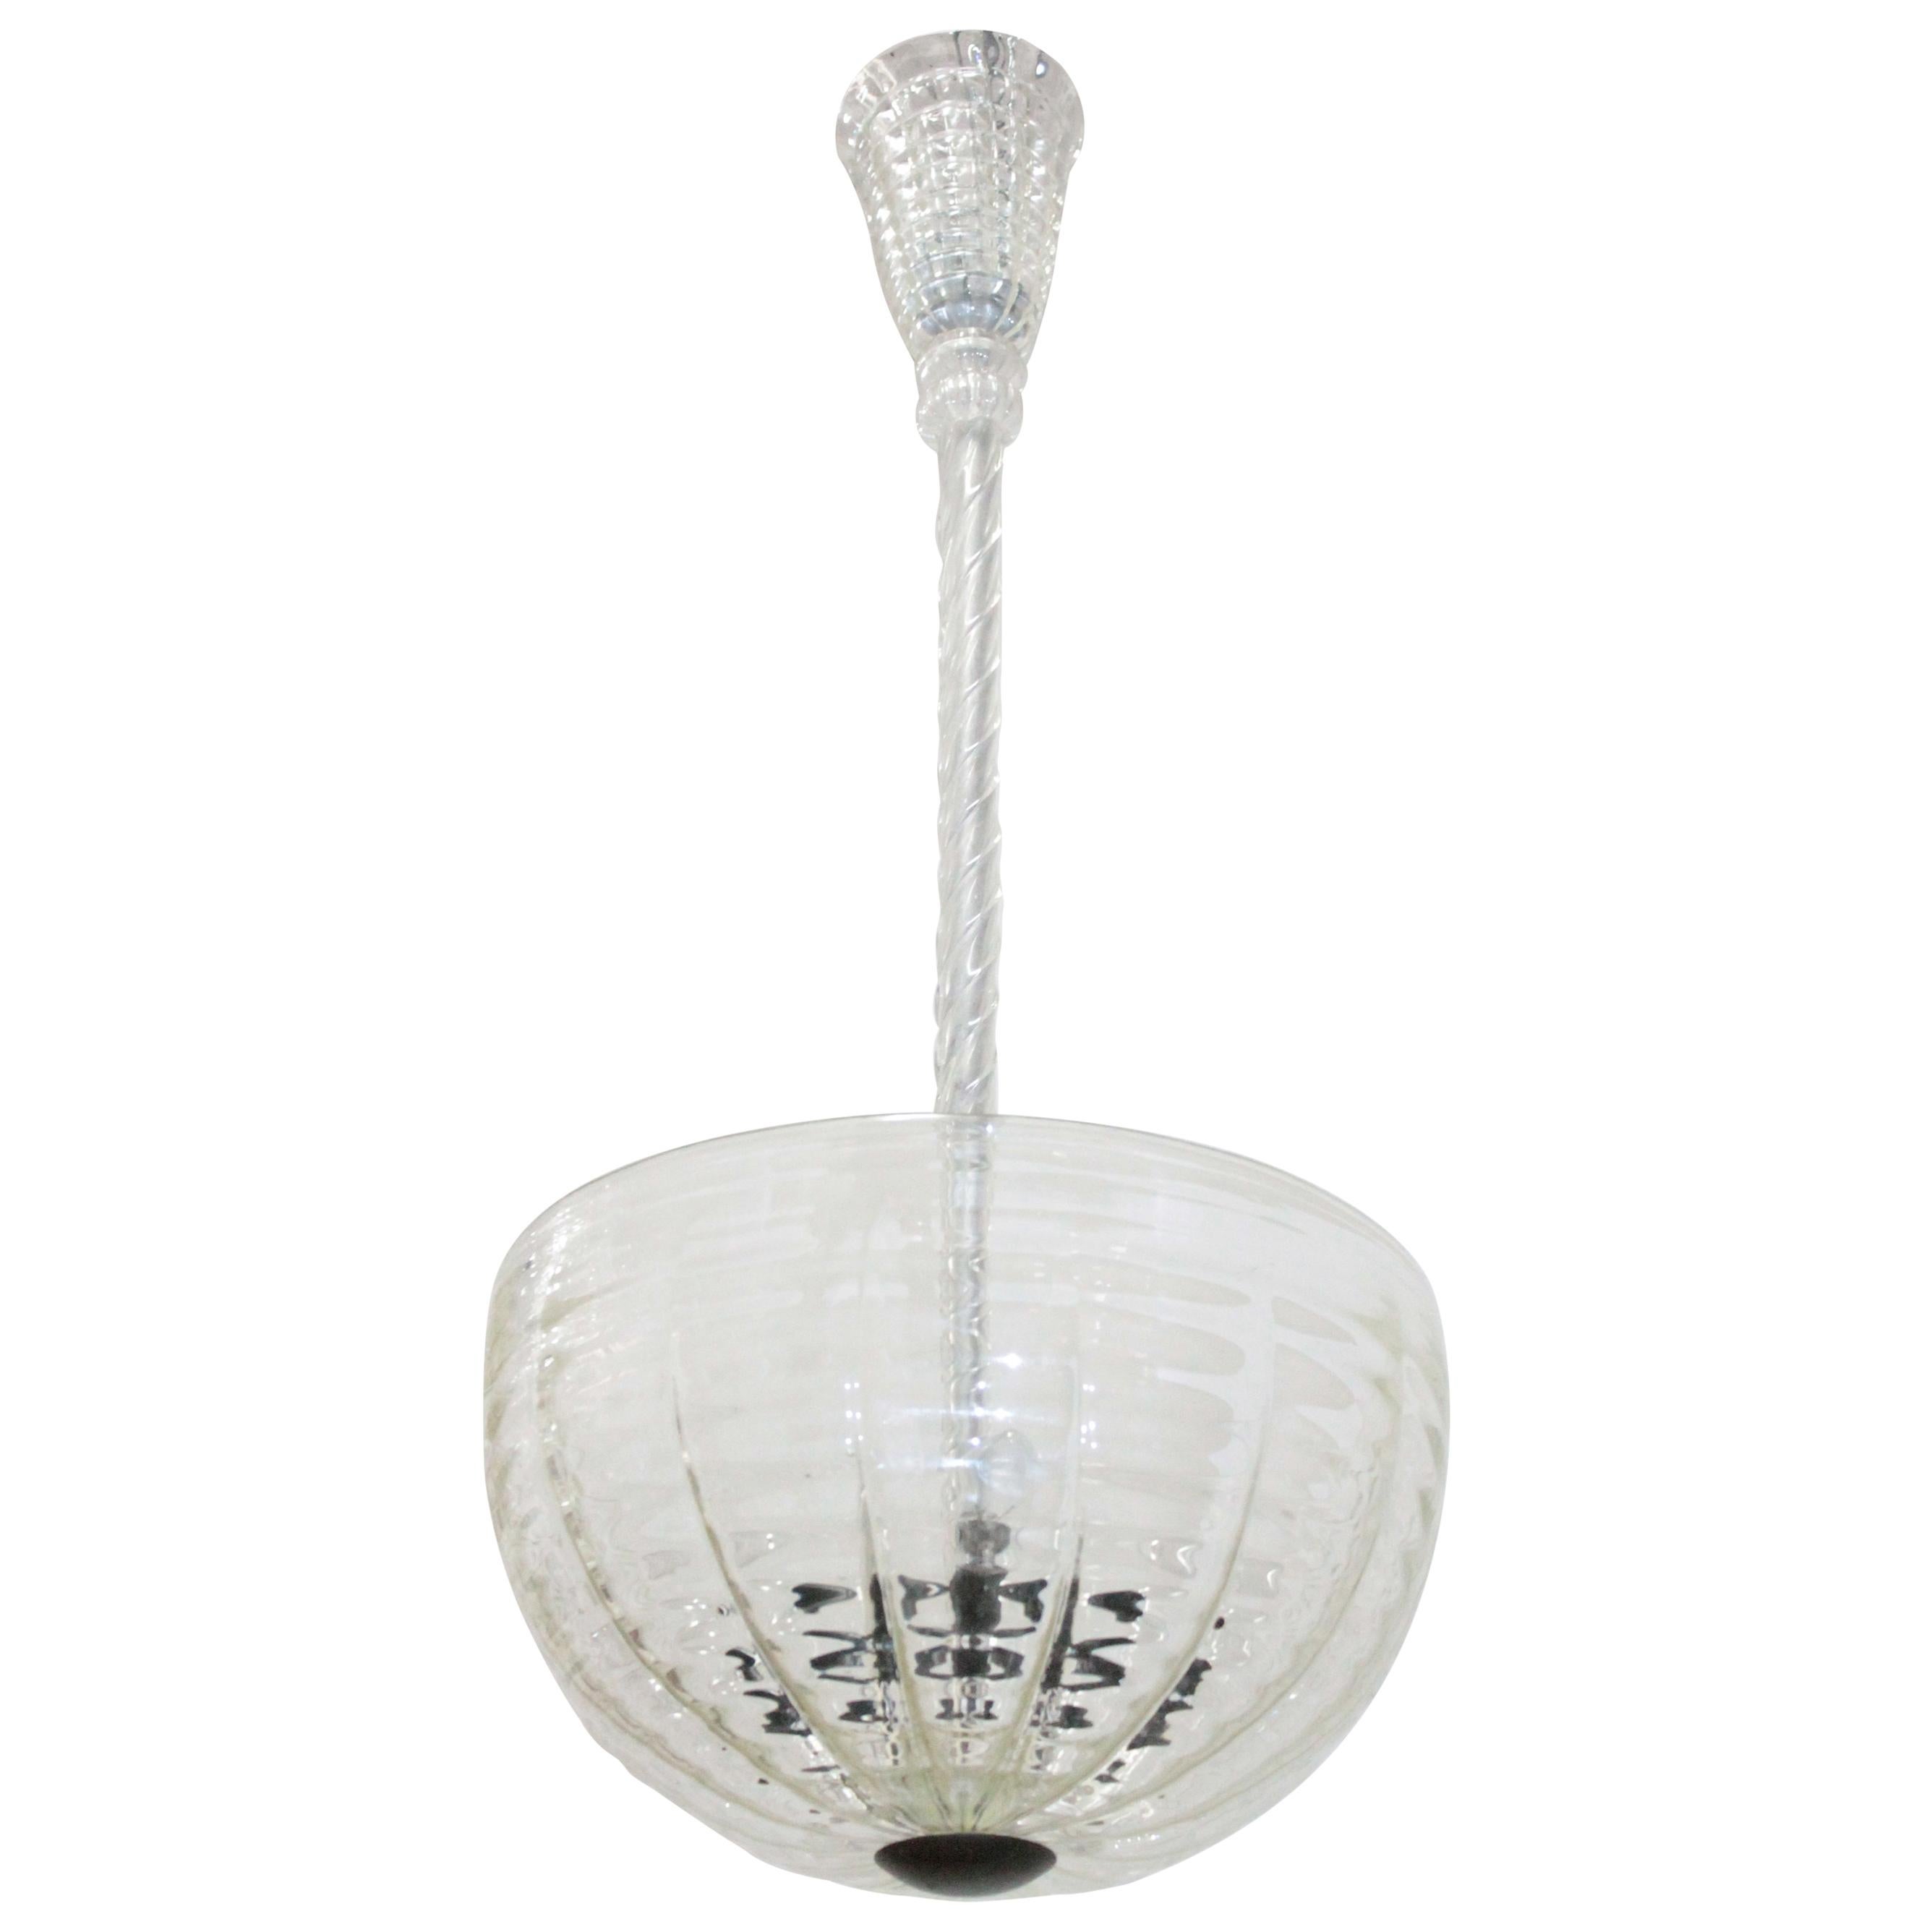 Midcentury Ceiling Lamp Murano Glass by Barovier & Toso, 1950s